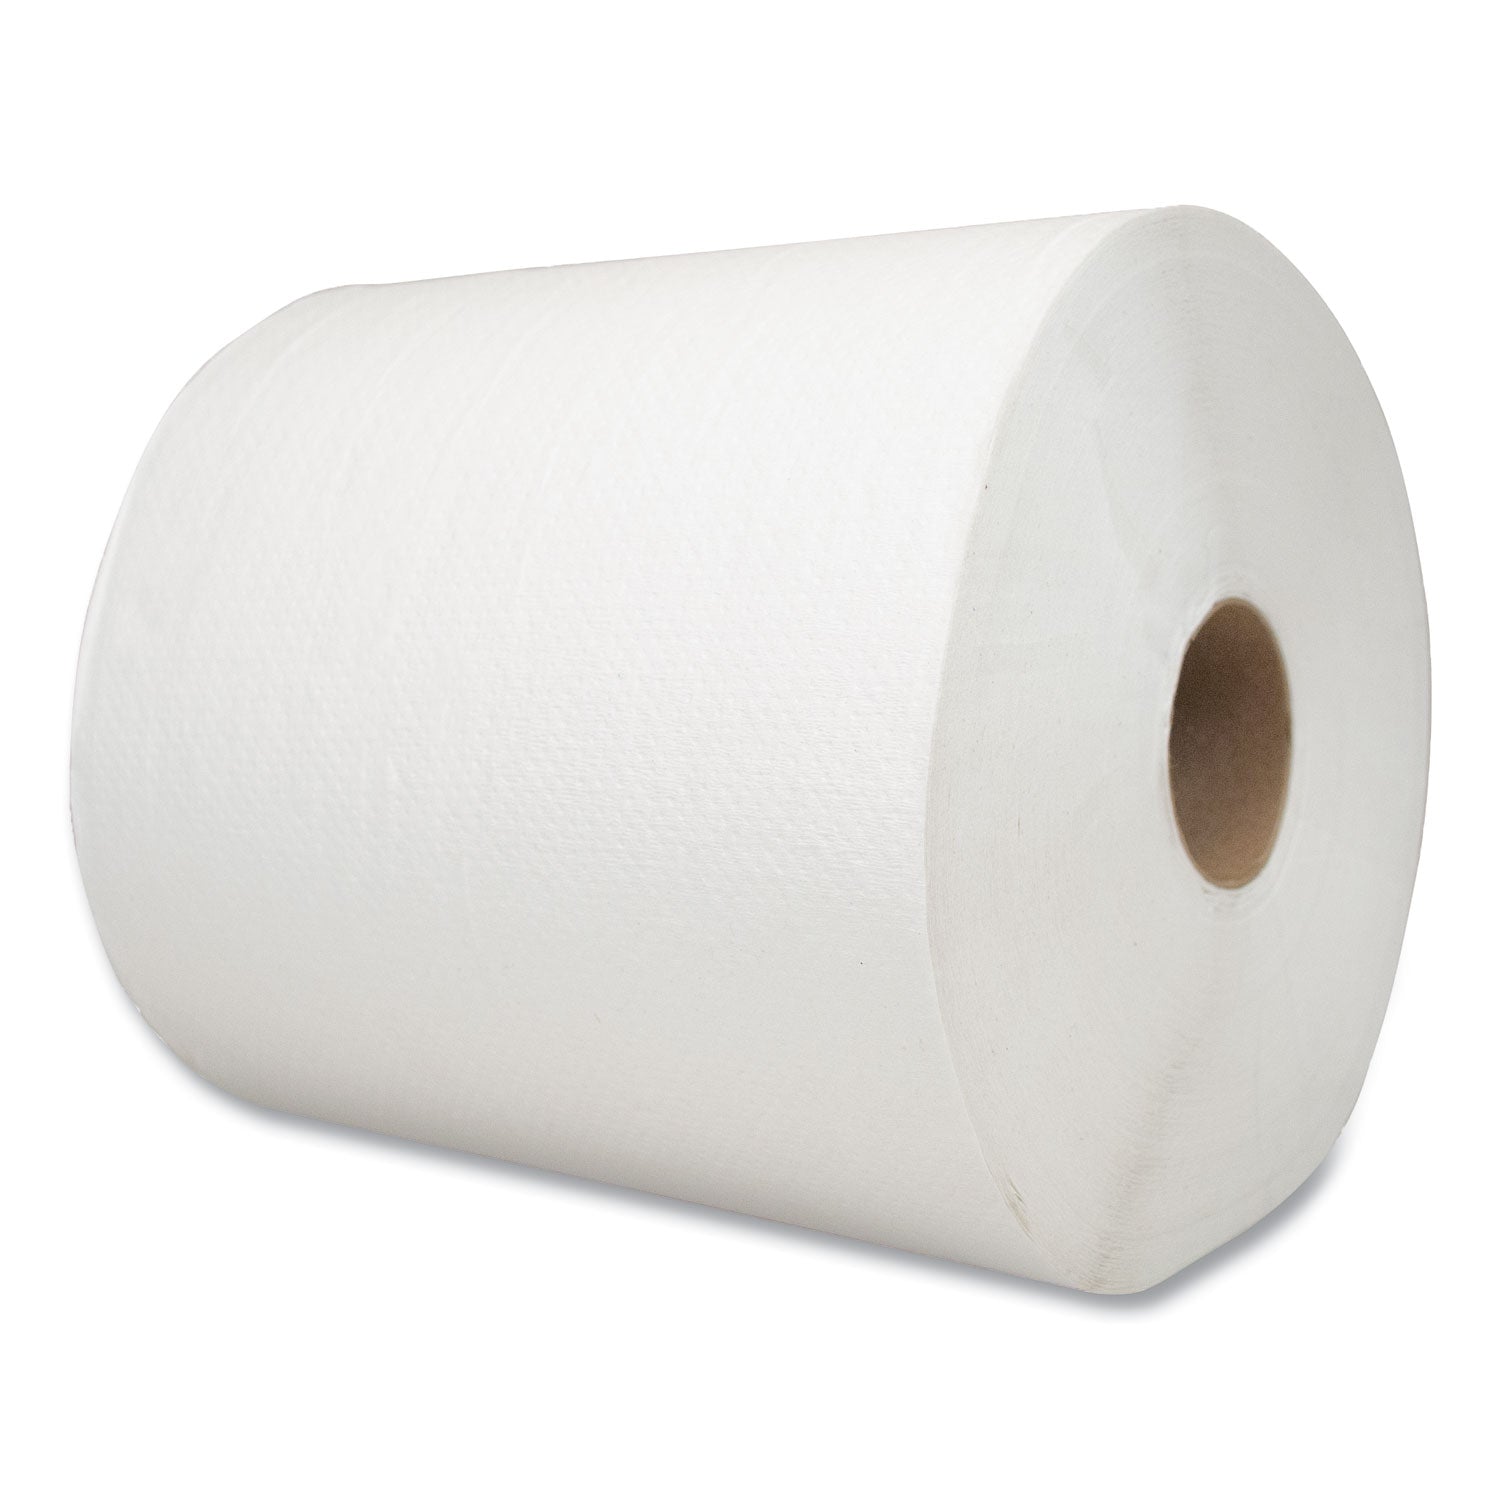 morsoft-universal-roll-towels-1-ply-8-x-700-ft-white-6-rolls-carton_mor6700w - 2